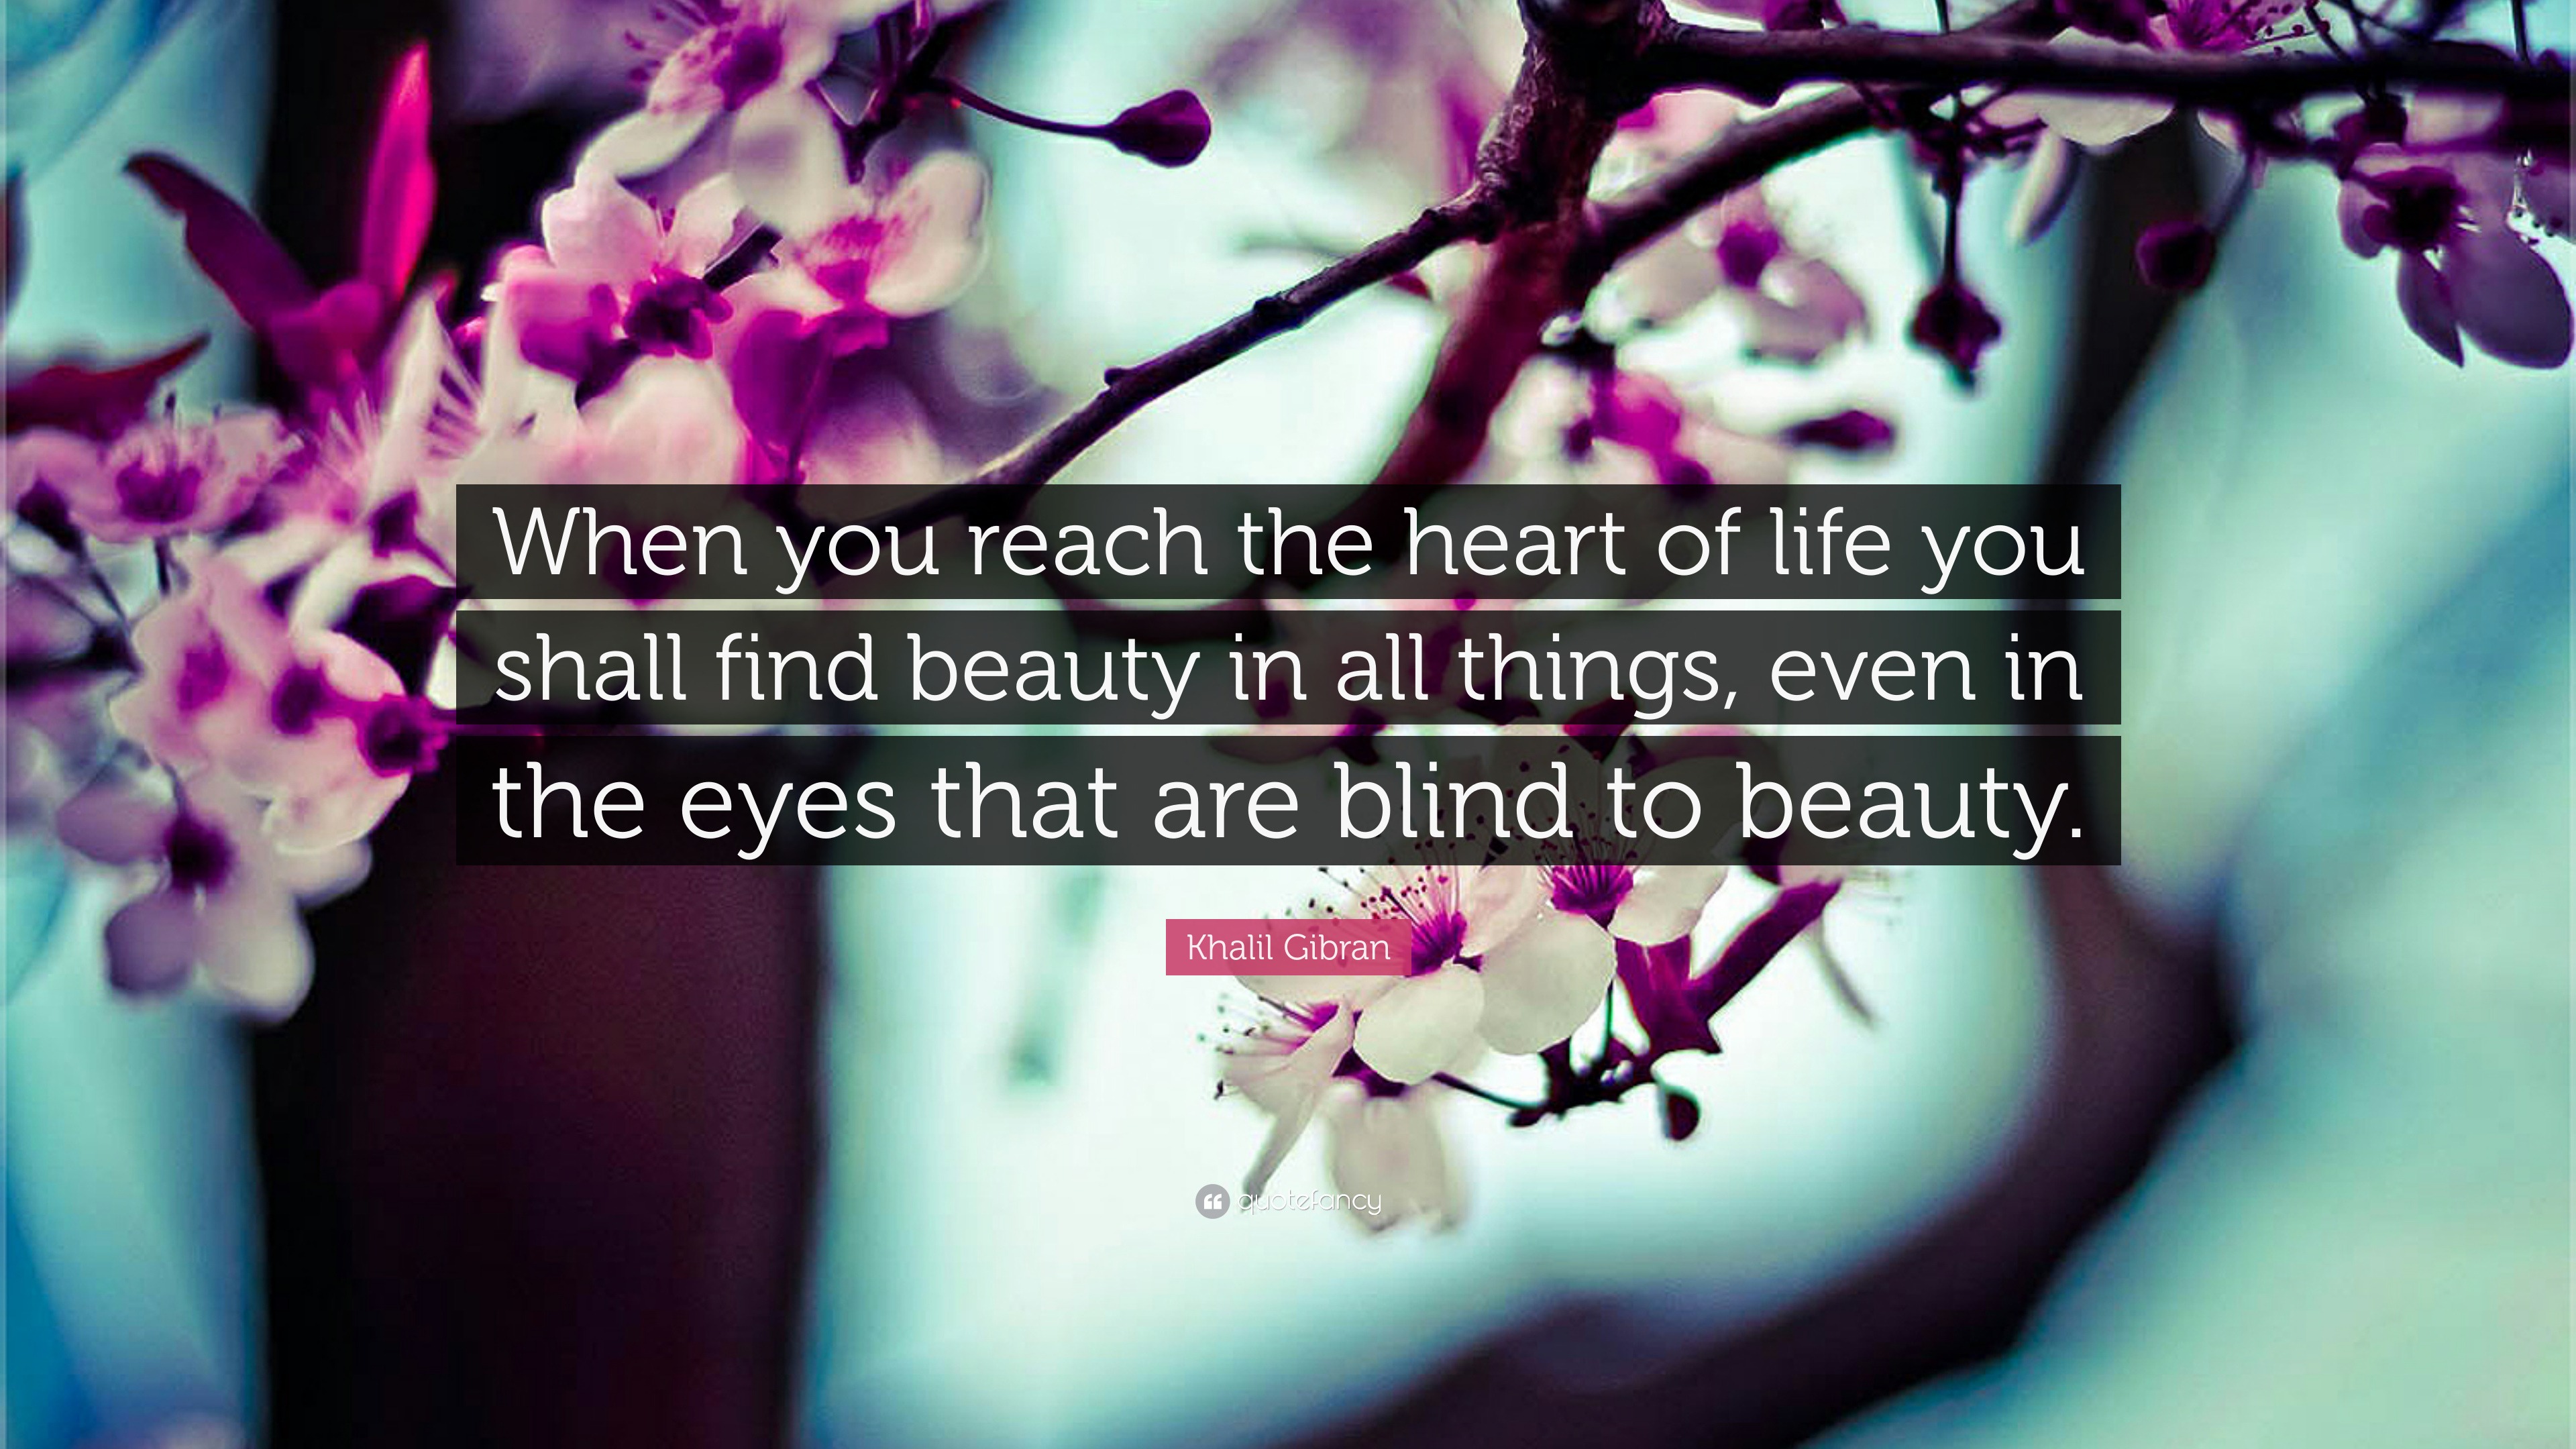 Khalil Gibran Quote: “When you reach the heart of life you shall find ...